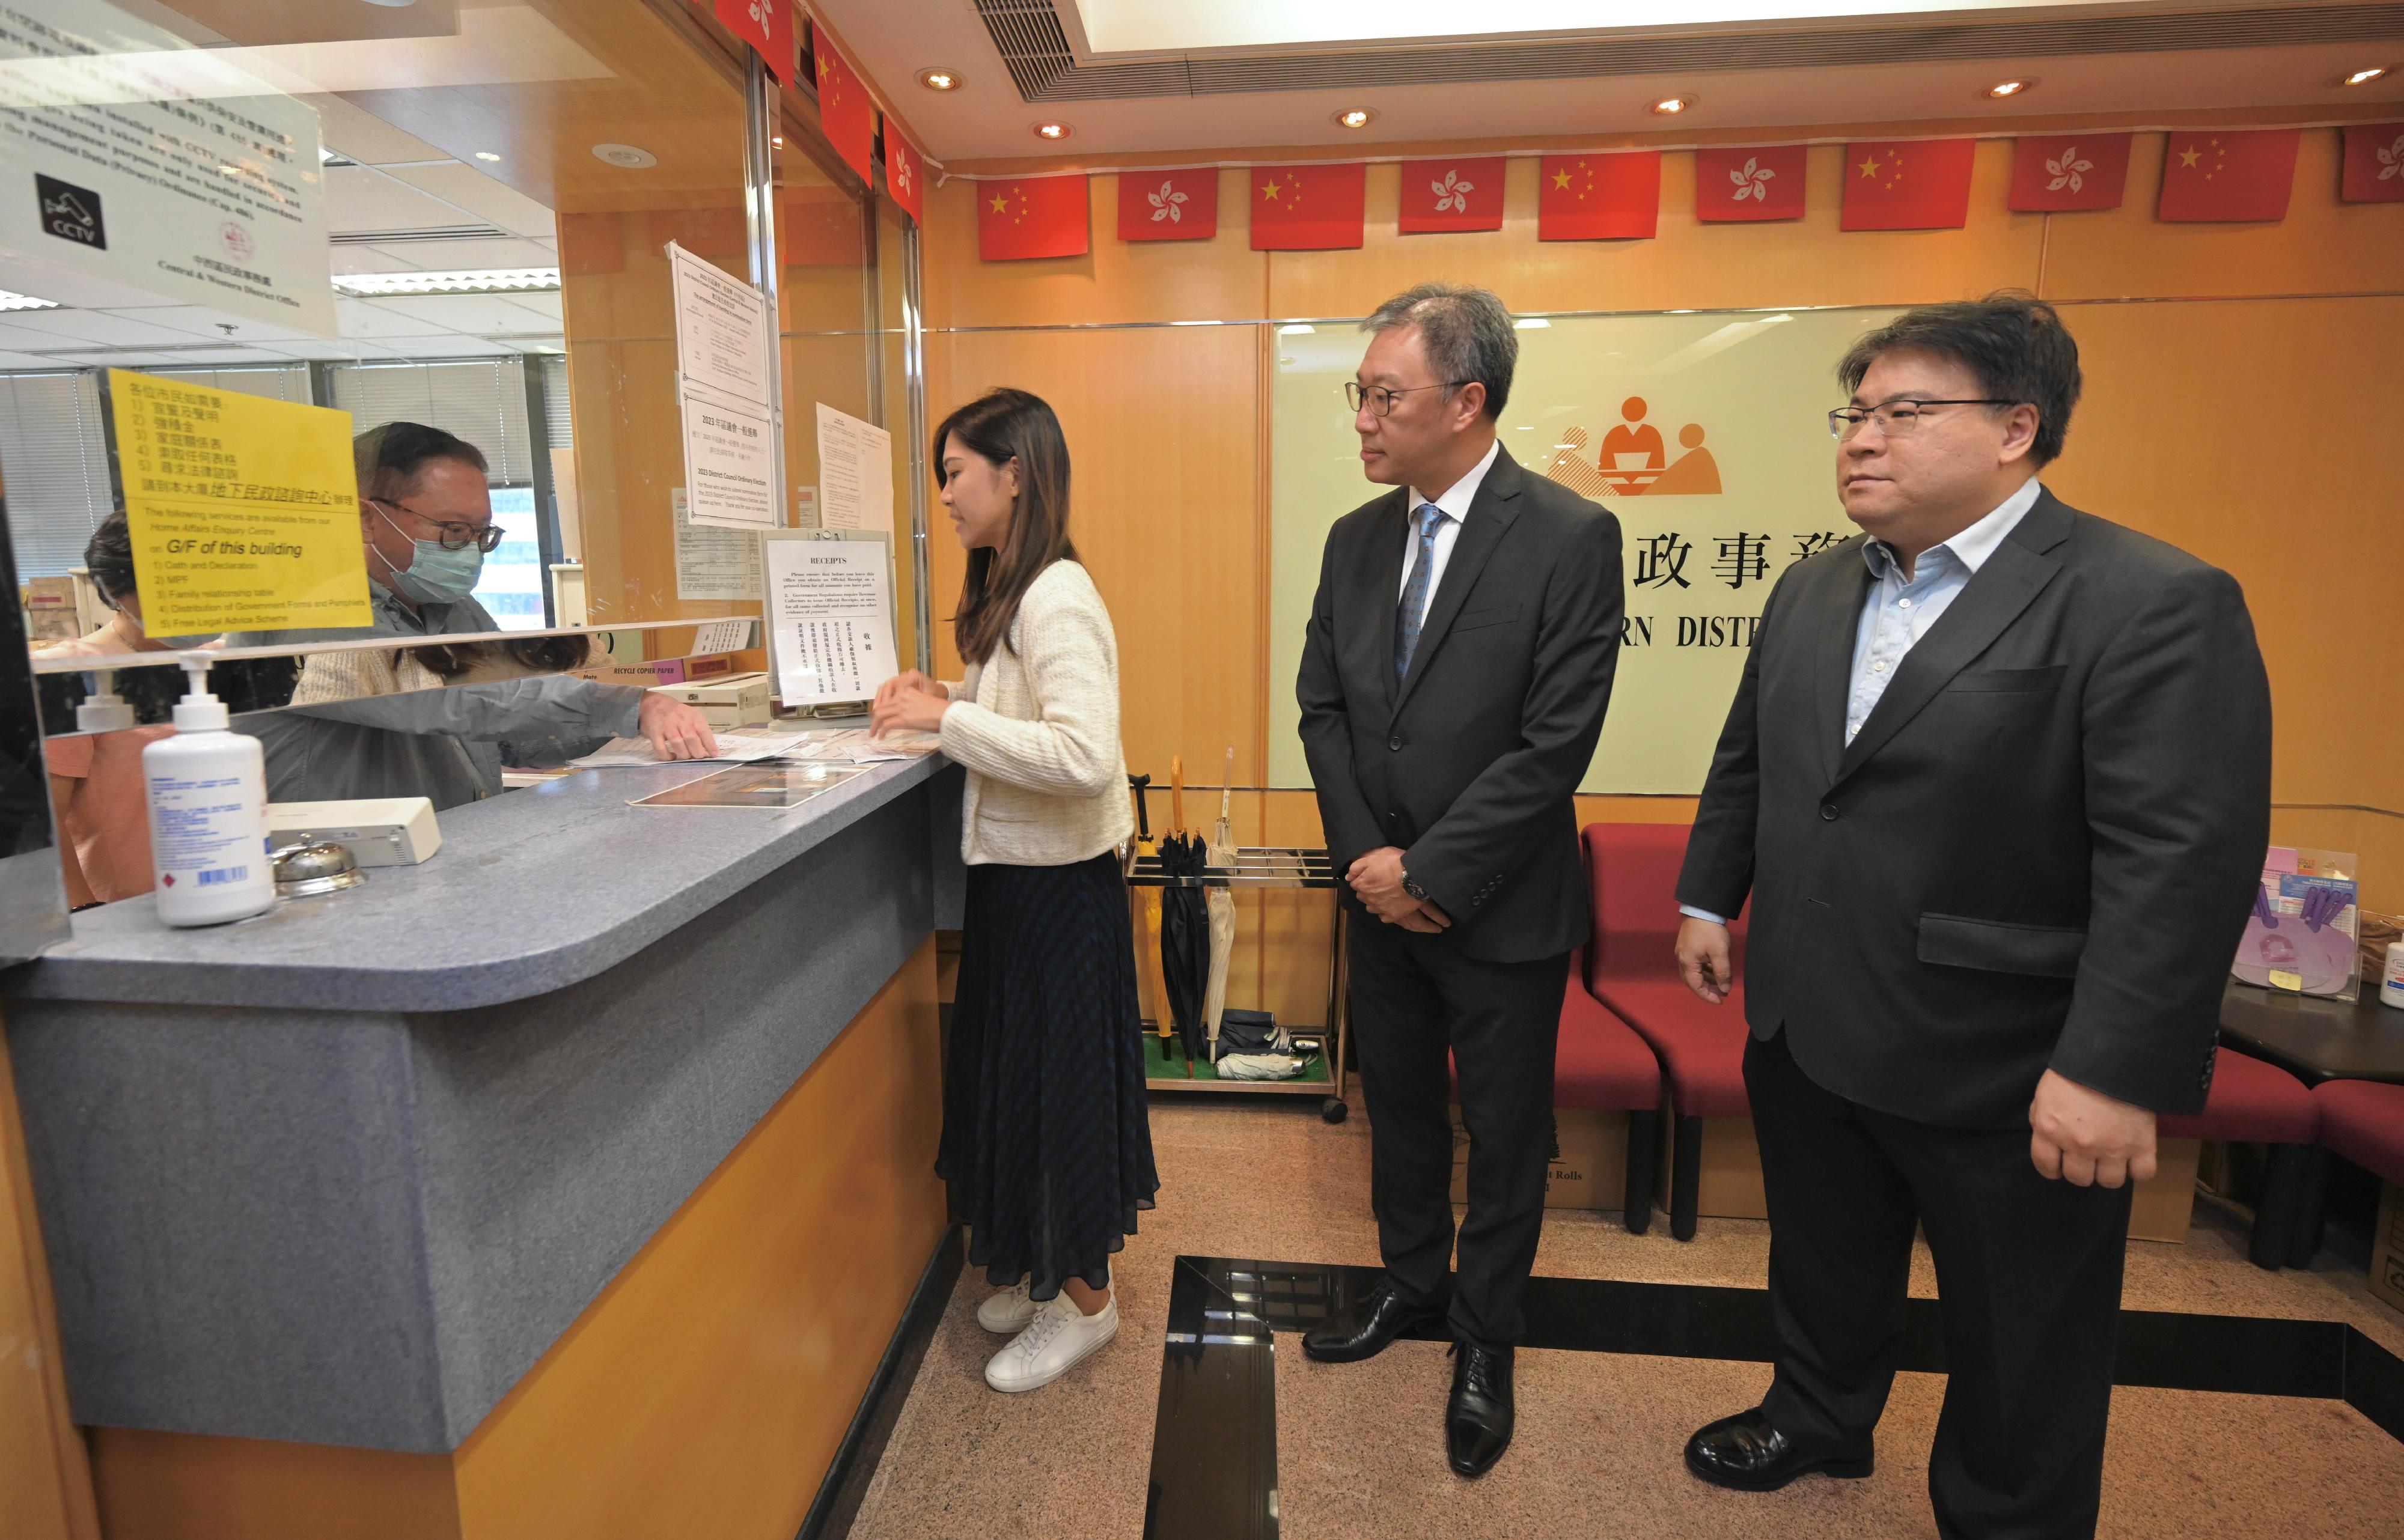 The Chairman of the Election Affairs Commission, Mr Justice David Lok (second right), today (October 16) visits the Returning Officer's office at the Central and Western District Office, where nomination forms for the 2023 District Council Ordinary Election will be received, to inspect the preparatory work at the venue. Also present is the Returning Officer of the Central and Western District, Mr David Leung (first right).